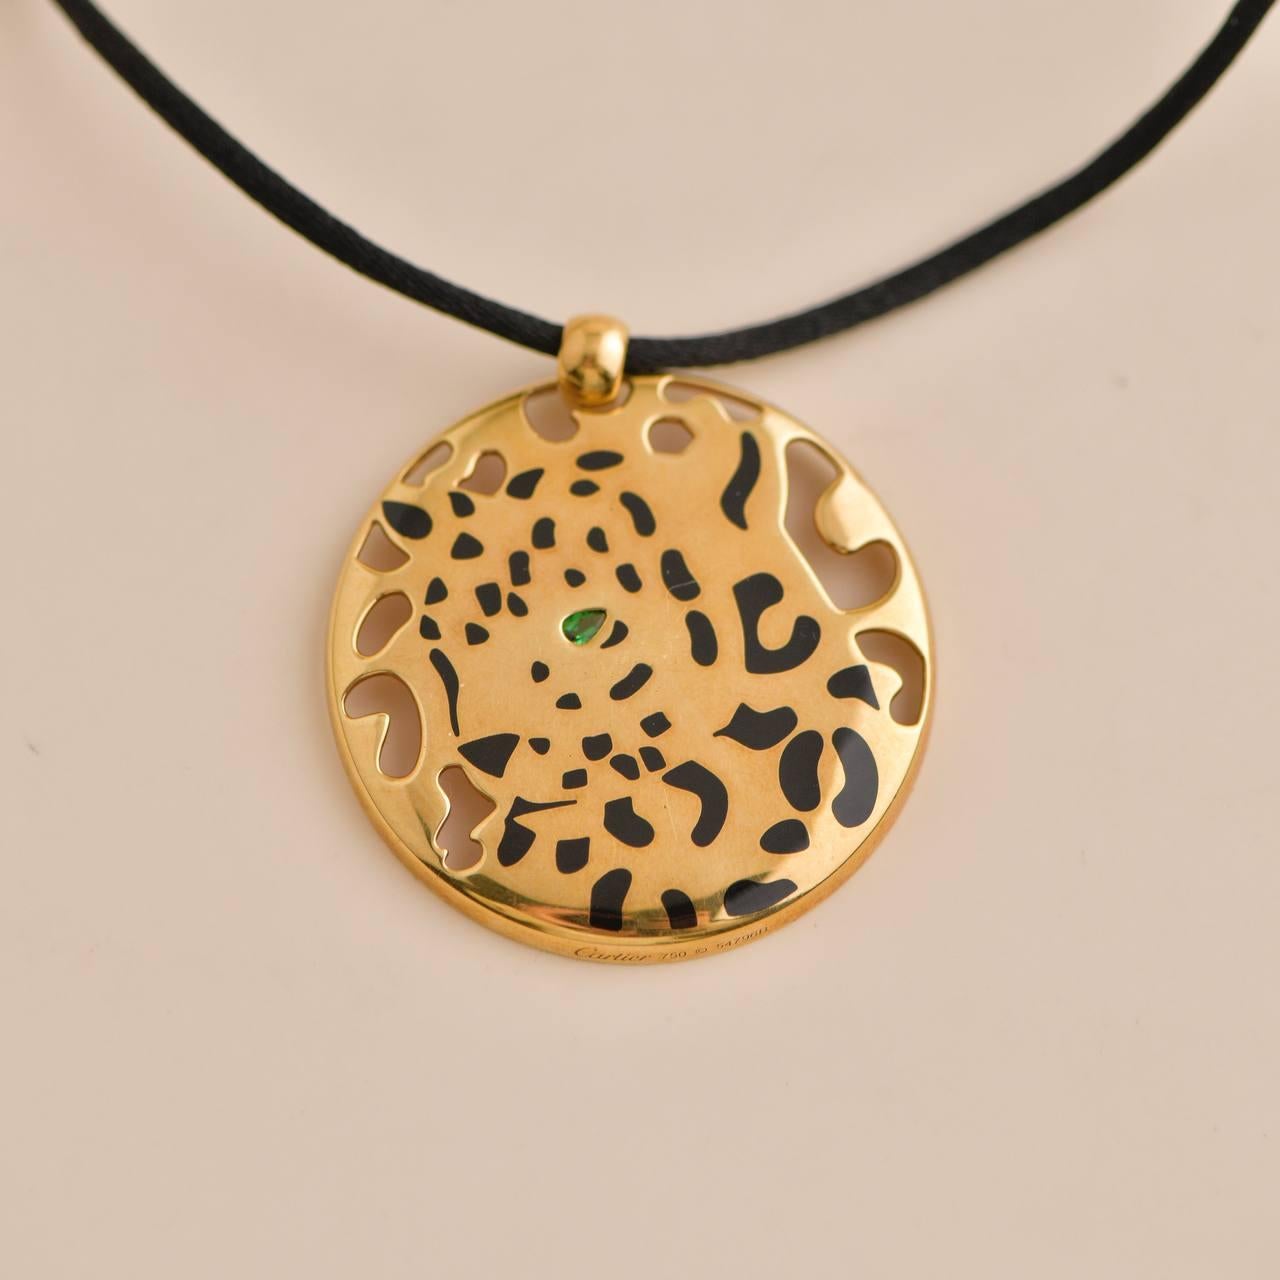 Cartier Yellow Gold Enamel Tsavorite Panthere Pendant Cord Necklace In Excellent Condition For Sale In Banbury, GB